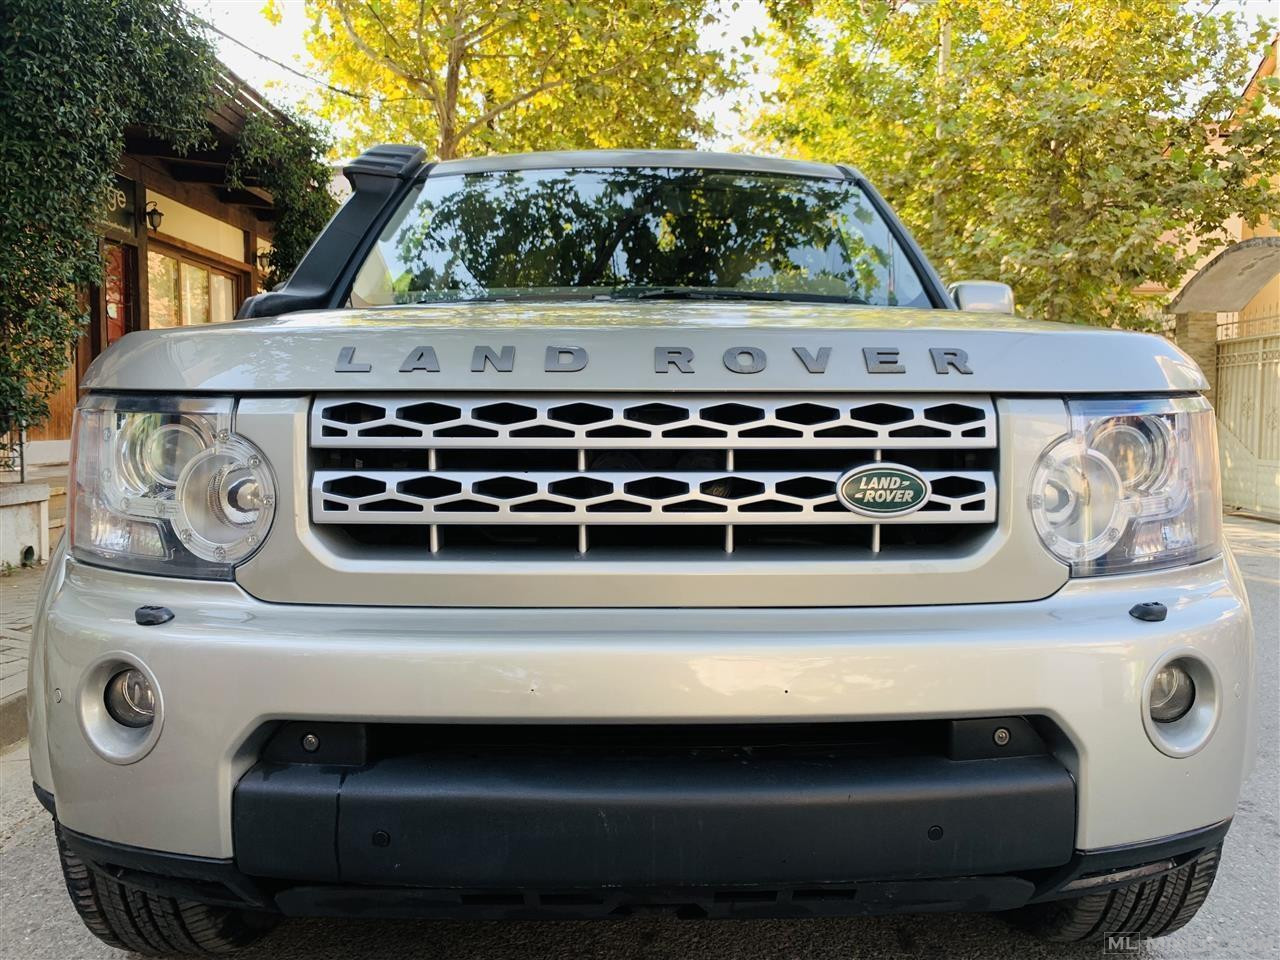 LAND ROVER DISCOVERY 4 -12 FULL MUNDESI NDERRIMI